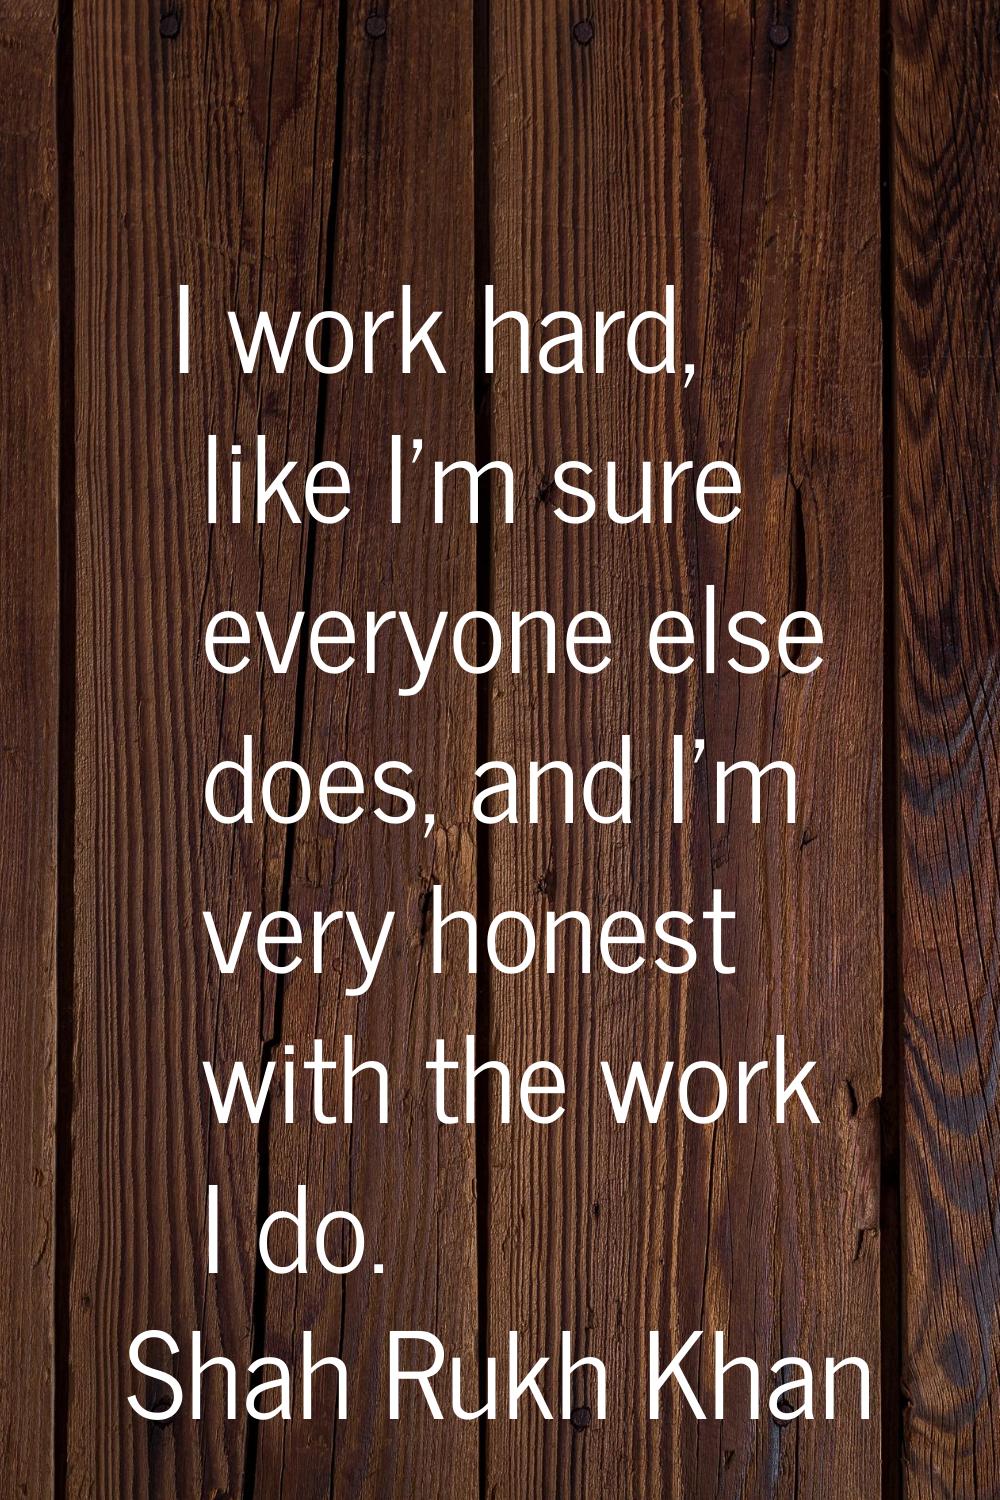 I work hard, like I'm sure everyone else does, and I'm very honest with the work I do.